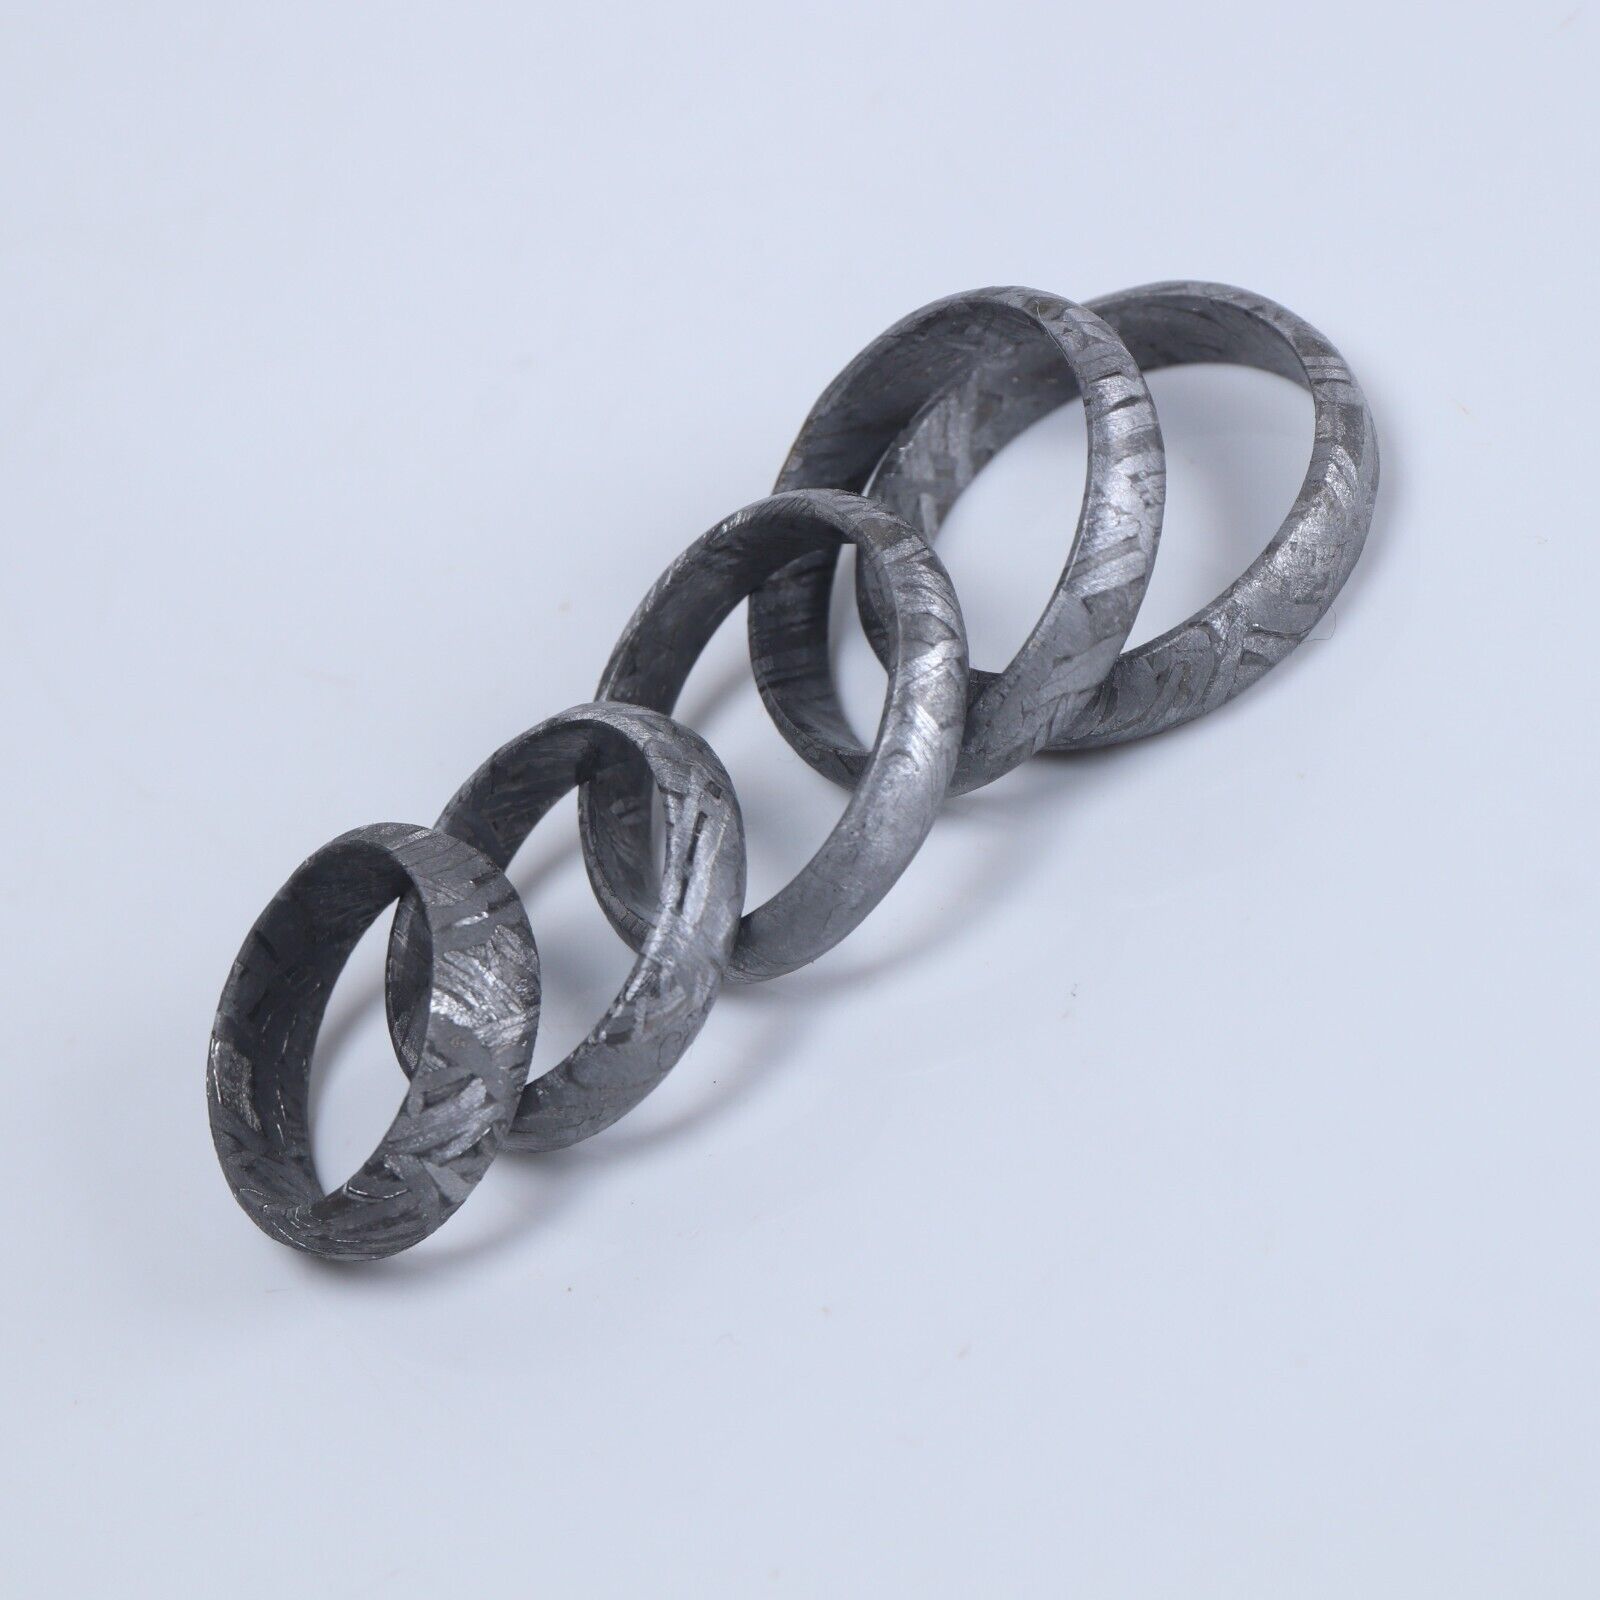 Natural Muonionalusta ring,space rock Jewelry,size can be customized,(5)RING,